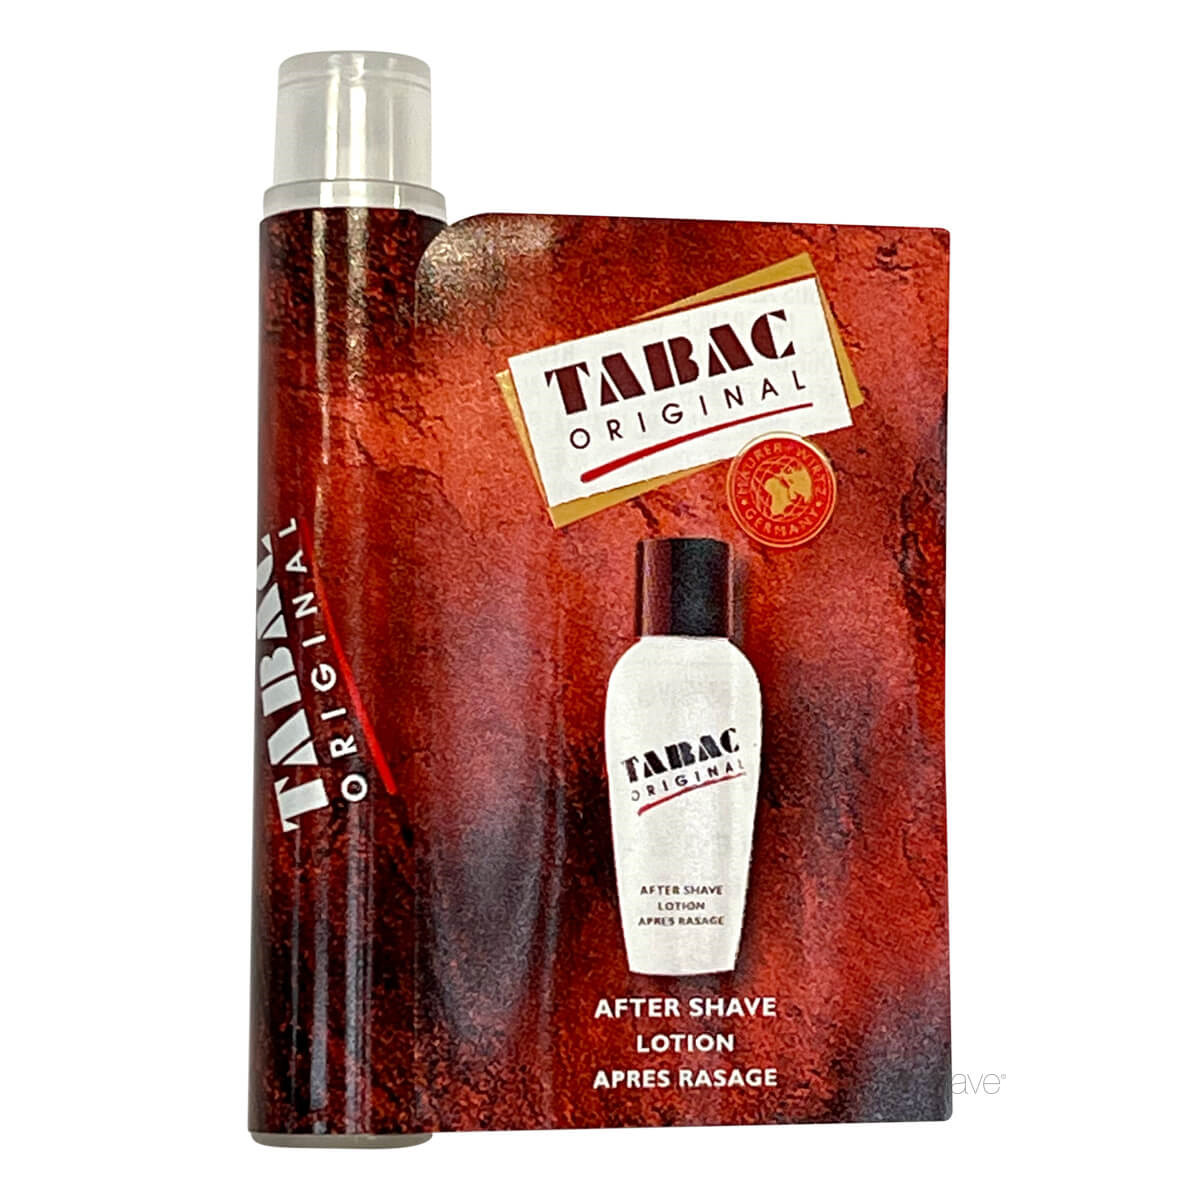 Tabac Aftershave Lotion, SAMPLE, 1.6 ml.